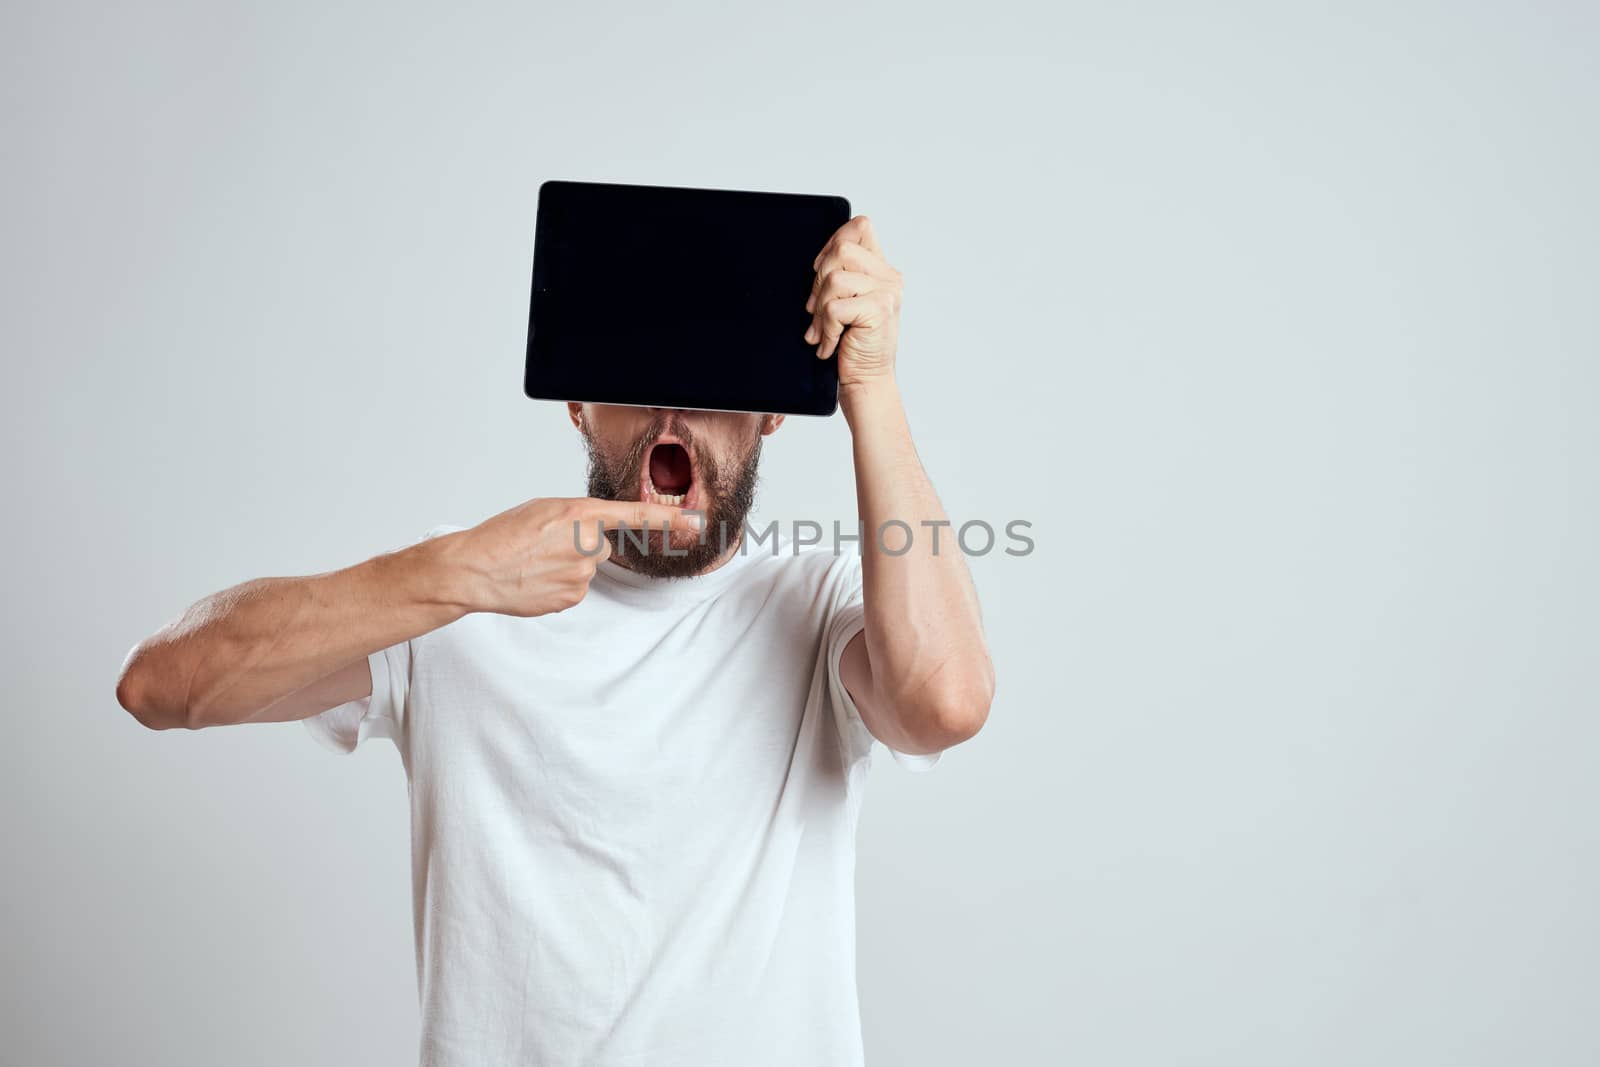 emotional man with a tablet in front of his eyes gesturing with his hands cropped view Copy Space Model light background by SHOTPRIME